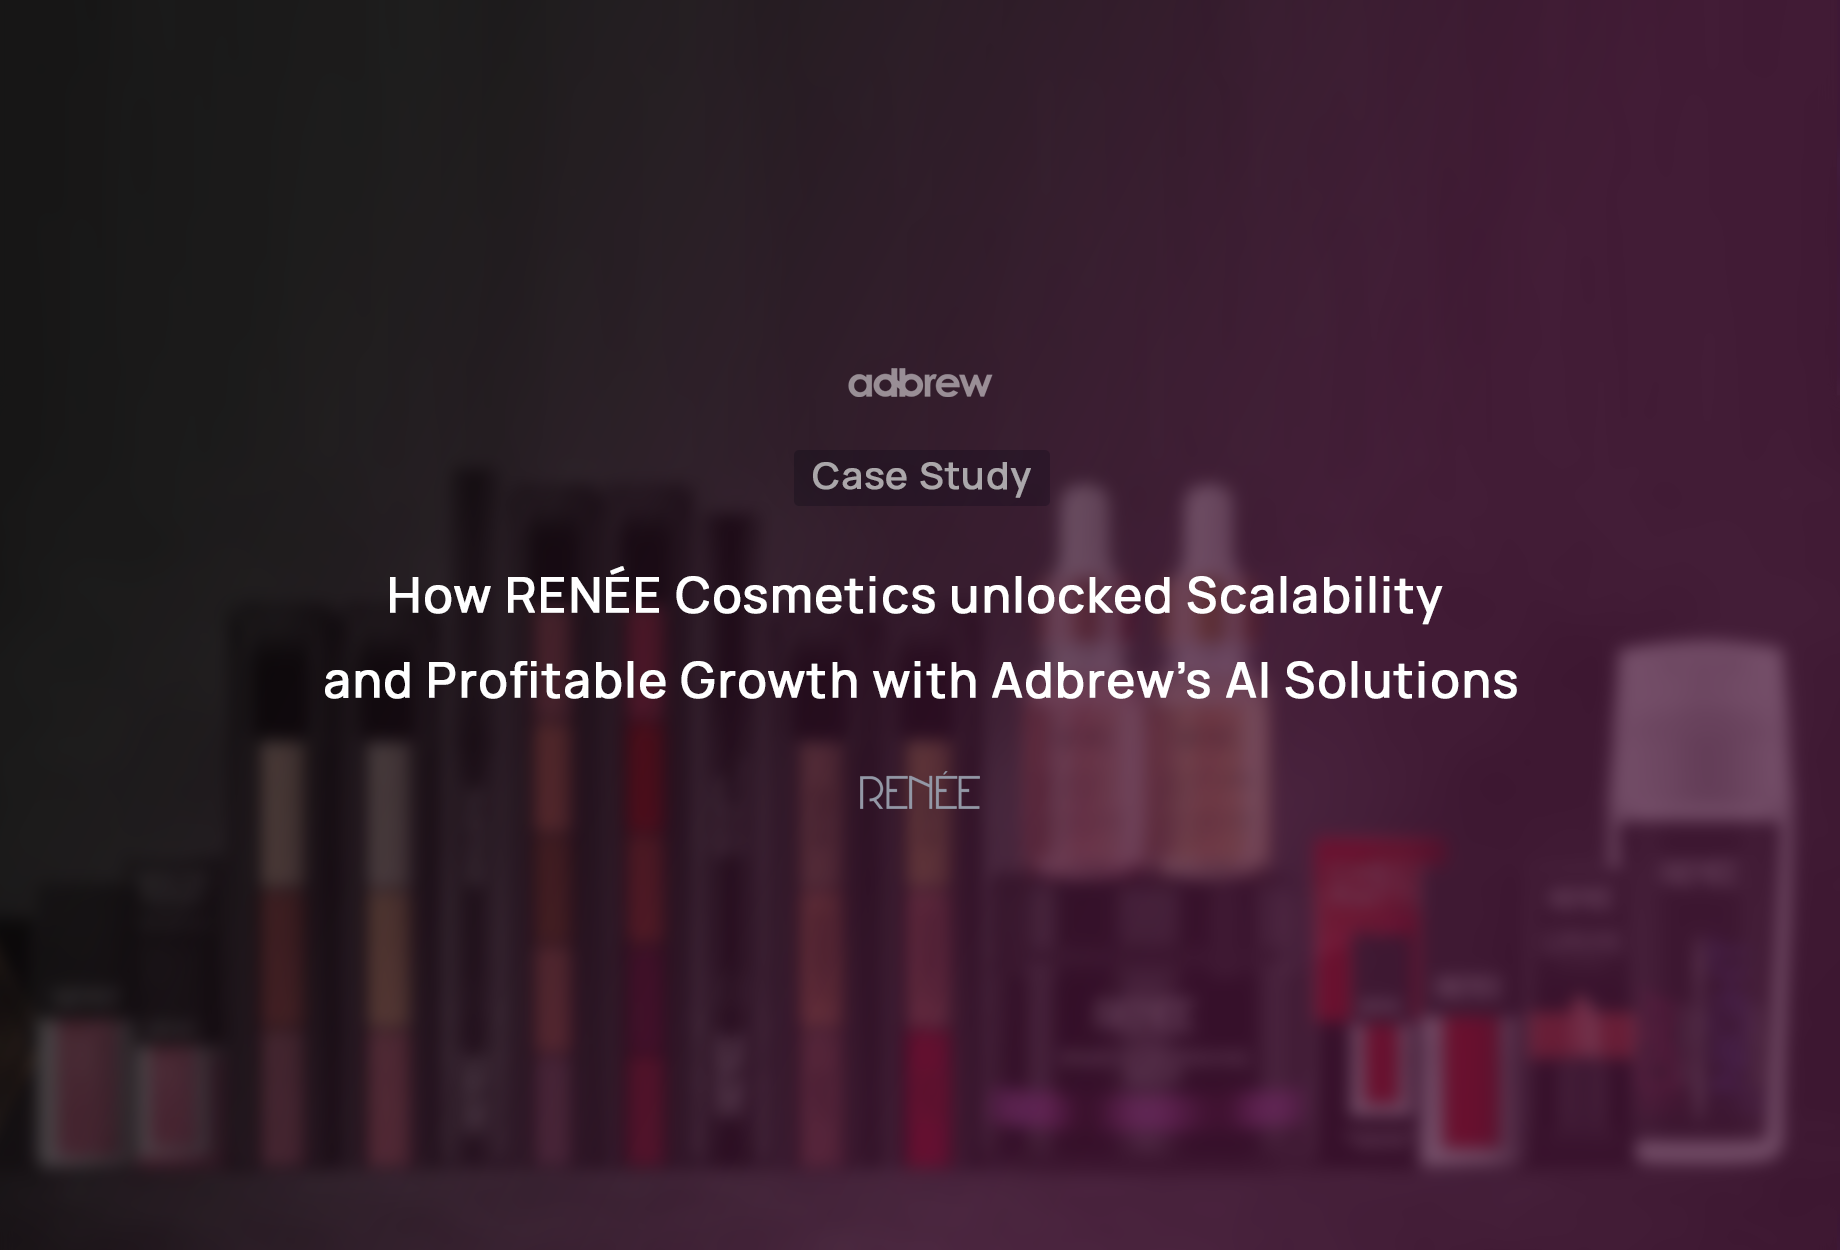 How RENÉE Cosmetics unlocked Scalability and Profitable Growth with Adbrew’s AI Solutions